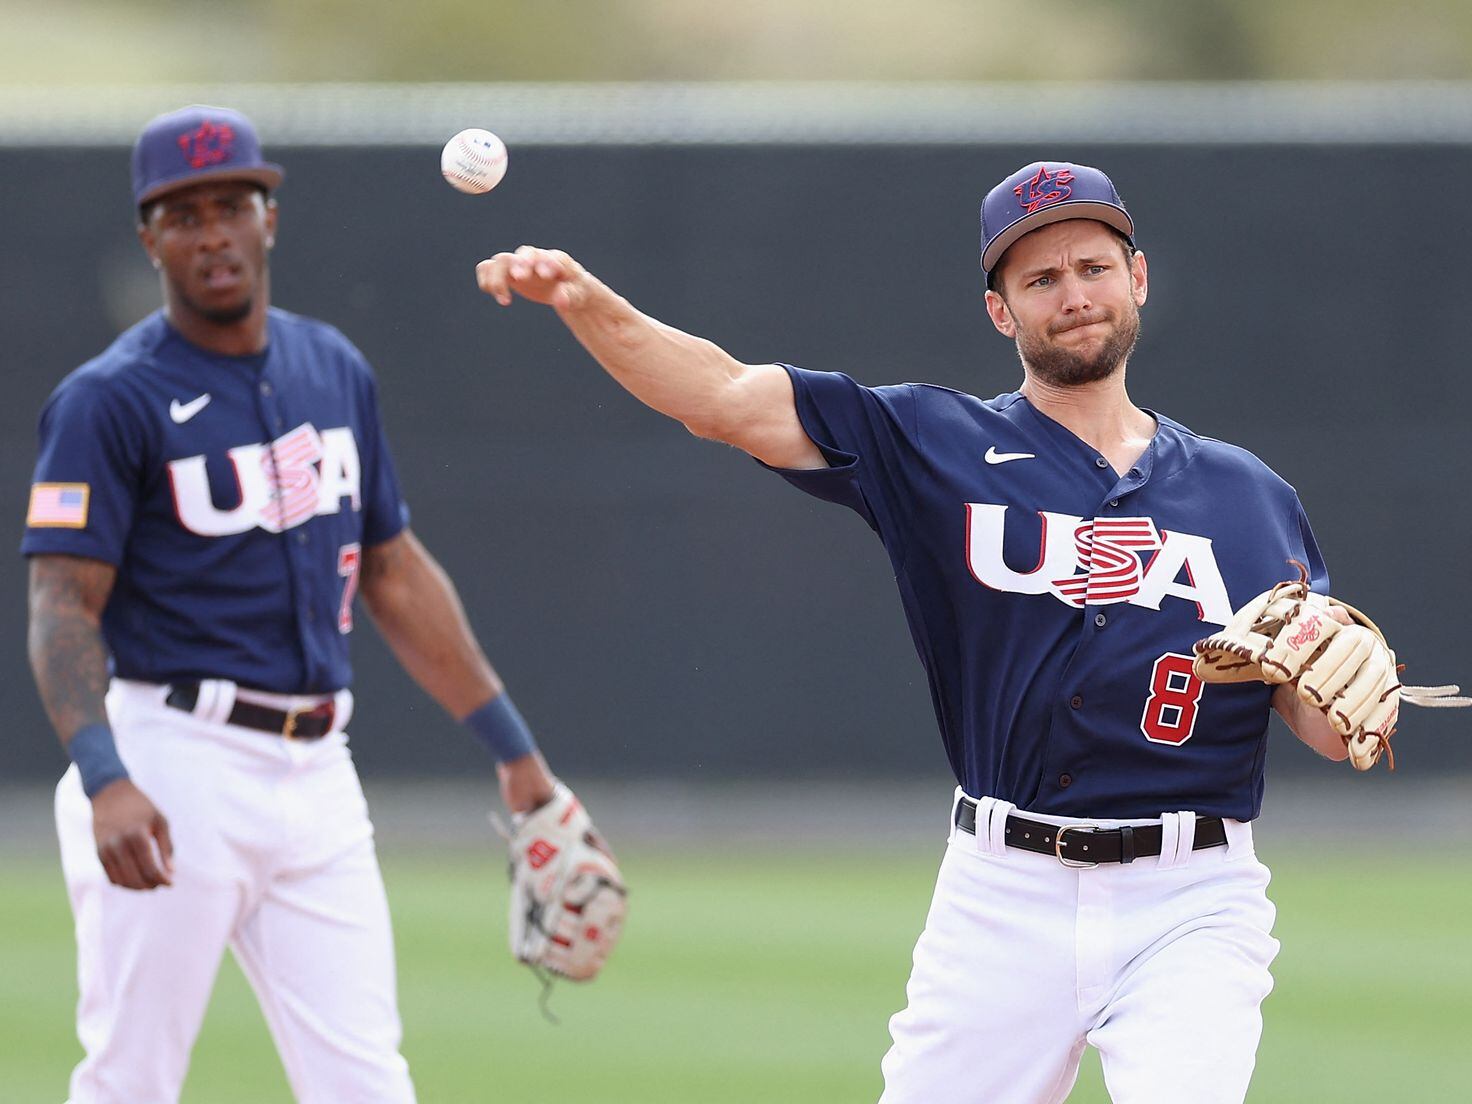 U.S. Advances Out of WBC Pool C in Superstar-Spangled Fashion